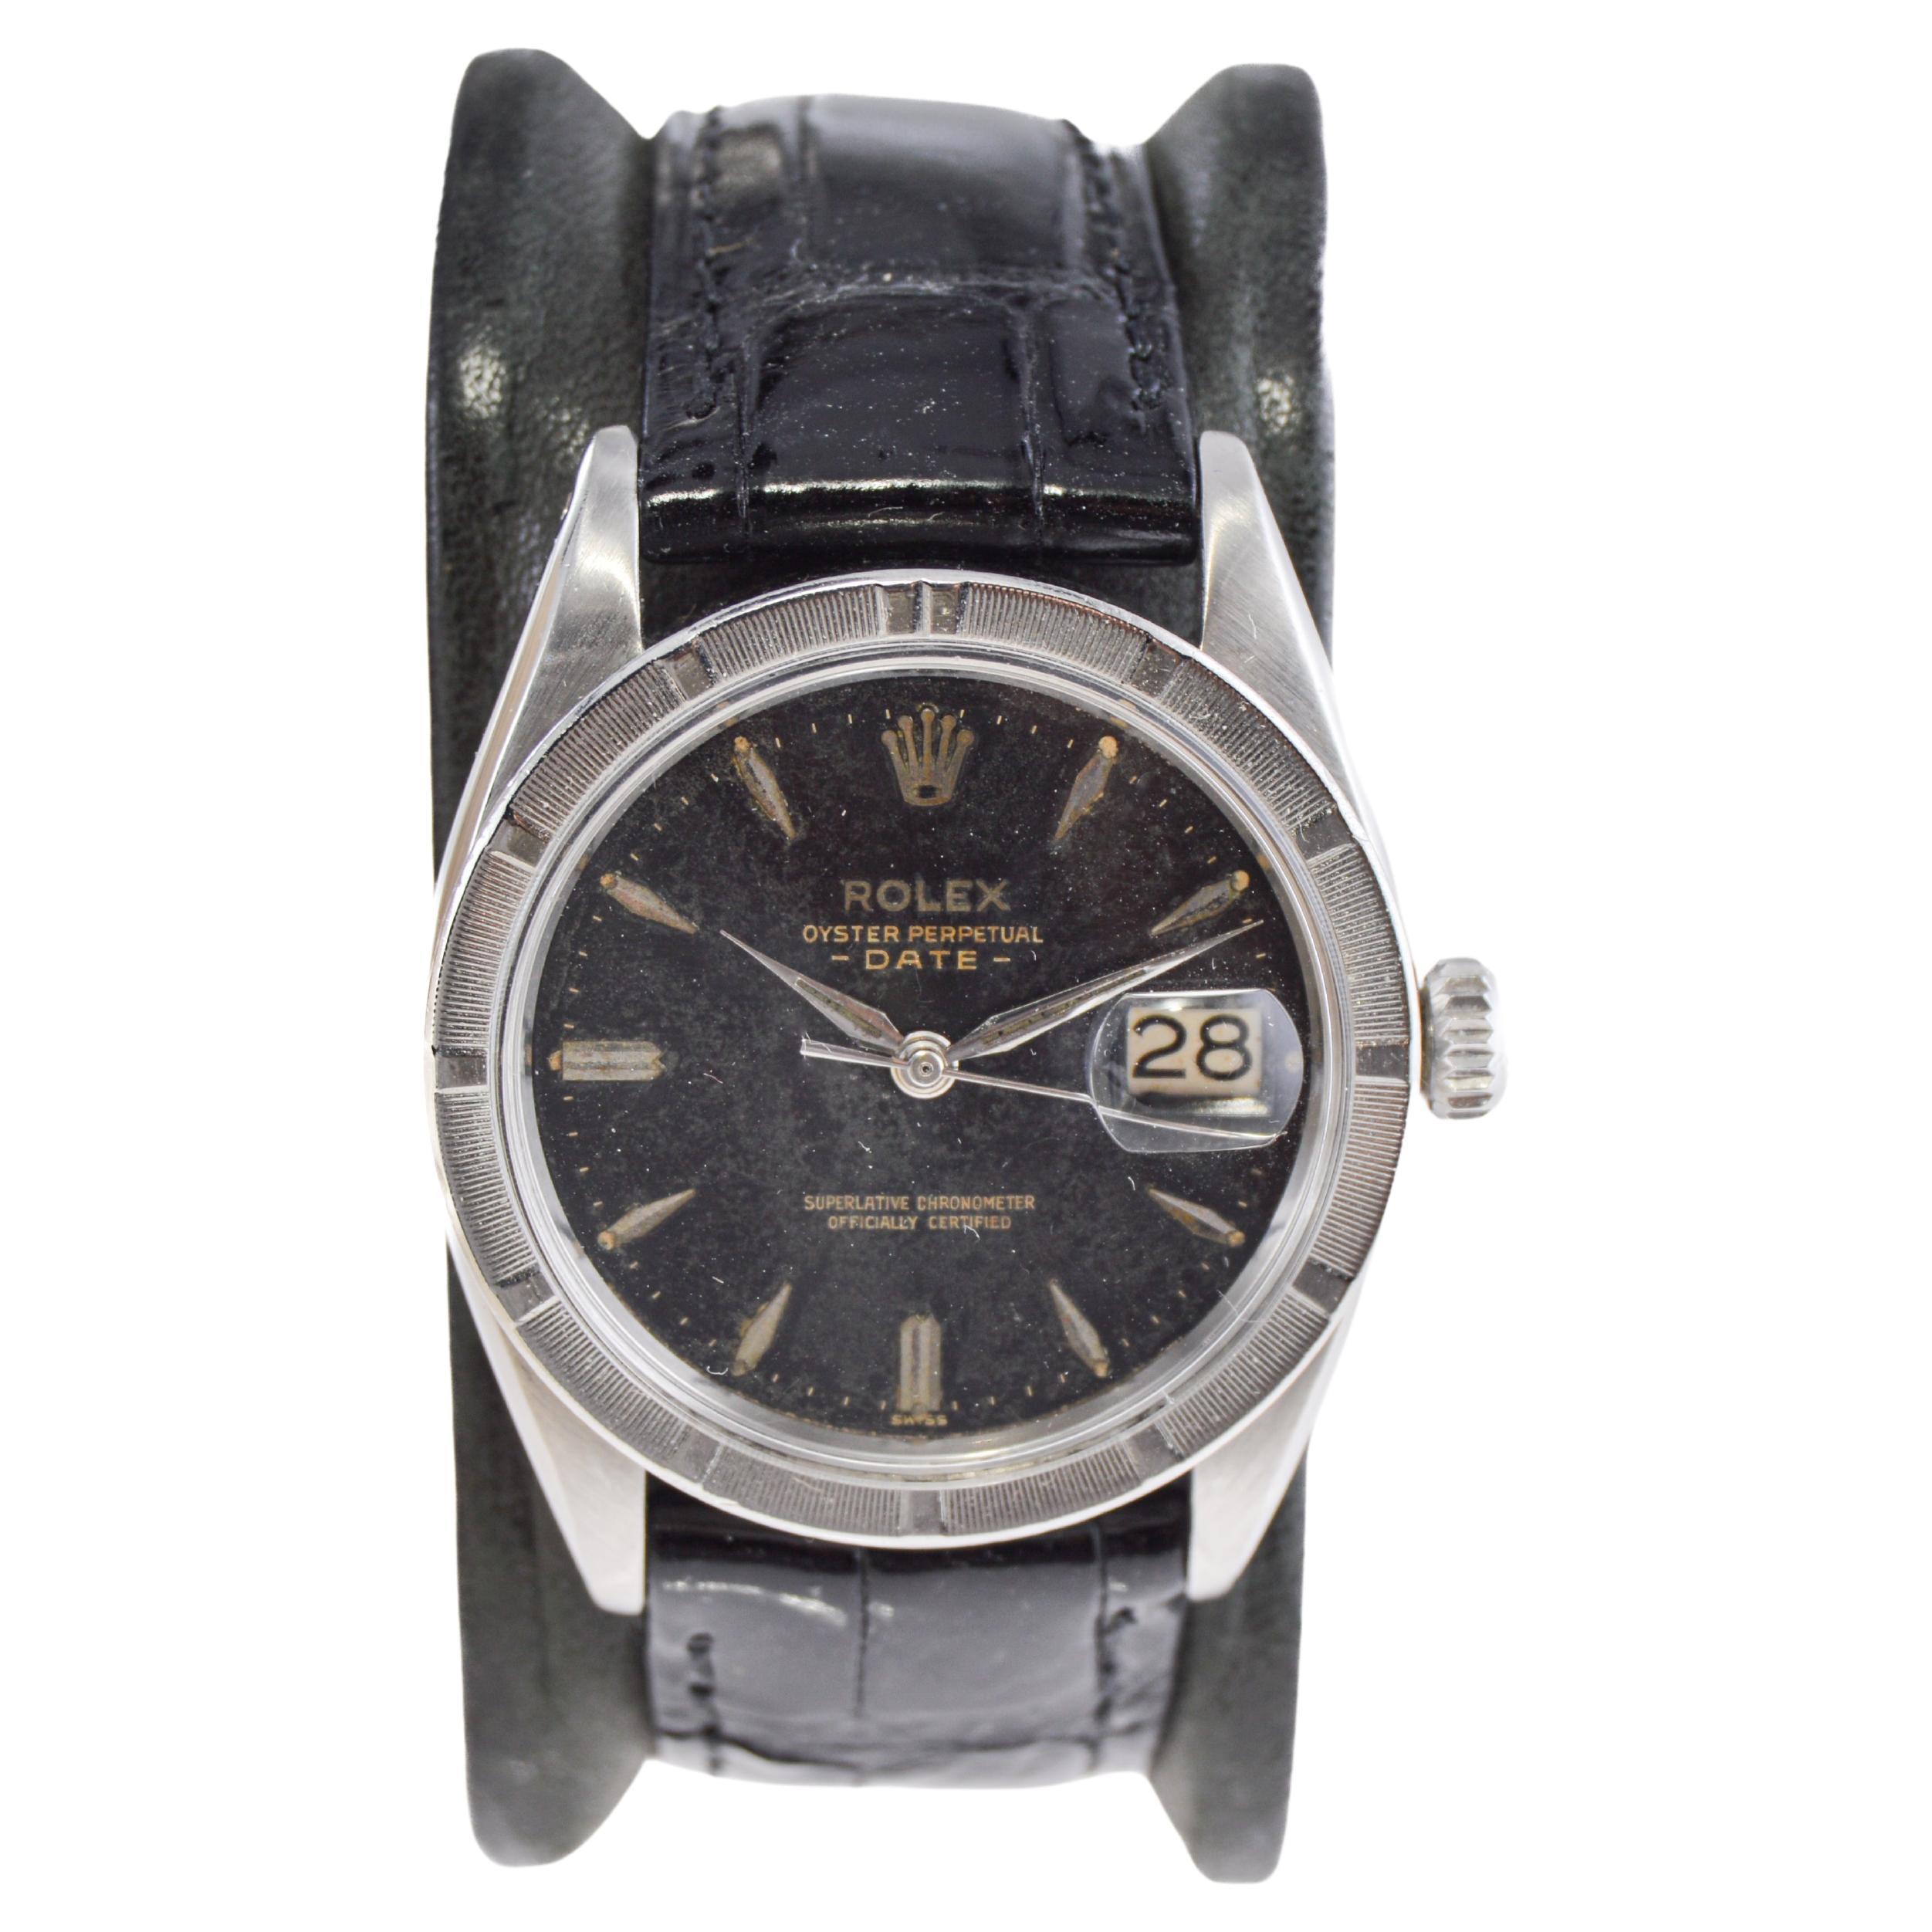 FACTORY / HOUSE: Rolex Watch Company
STYLE / REFERENCE: Oyster Perpetual Date / Reference 1501
METAL / MATERIAL: Stainless Steel
CIRCA / YEAR: 1960
DIMENSIONS / SIZE: 40mm Length X 35mm Diameter
MOVEMENT / CALIBER: Perpetual Winding / 26 Jewels /